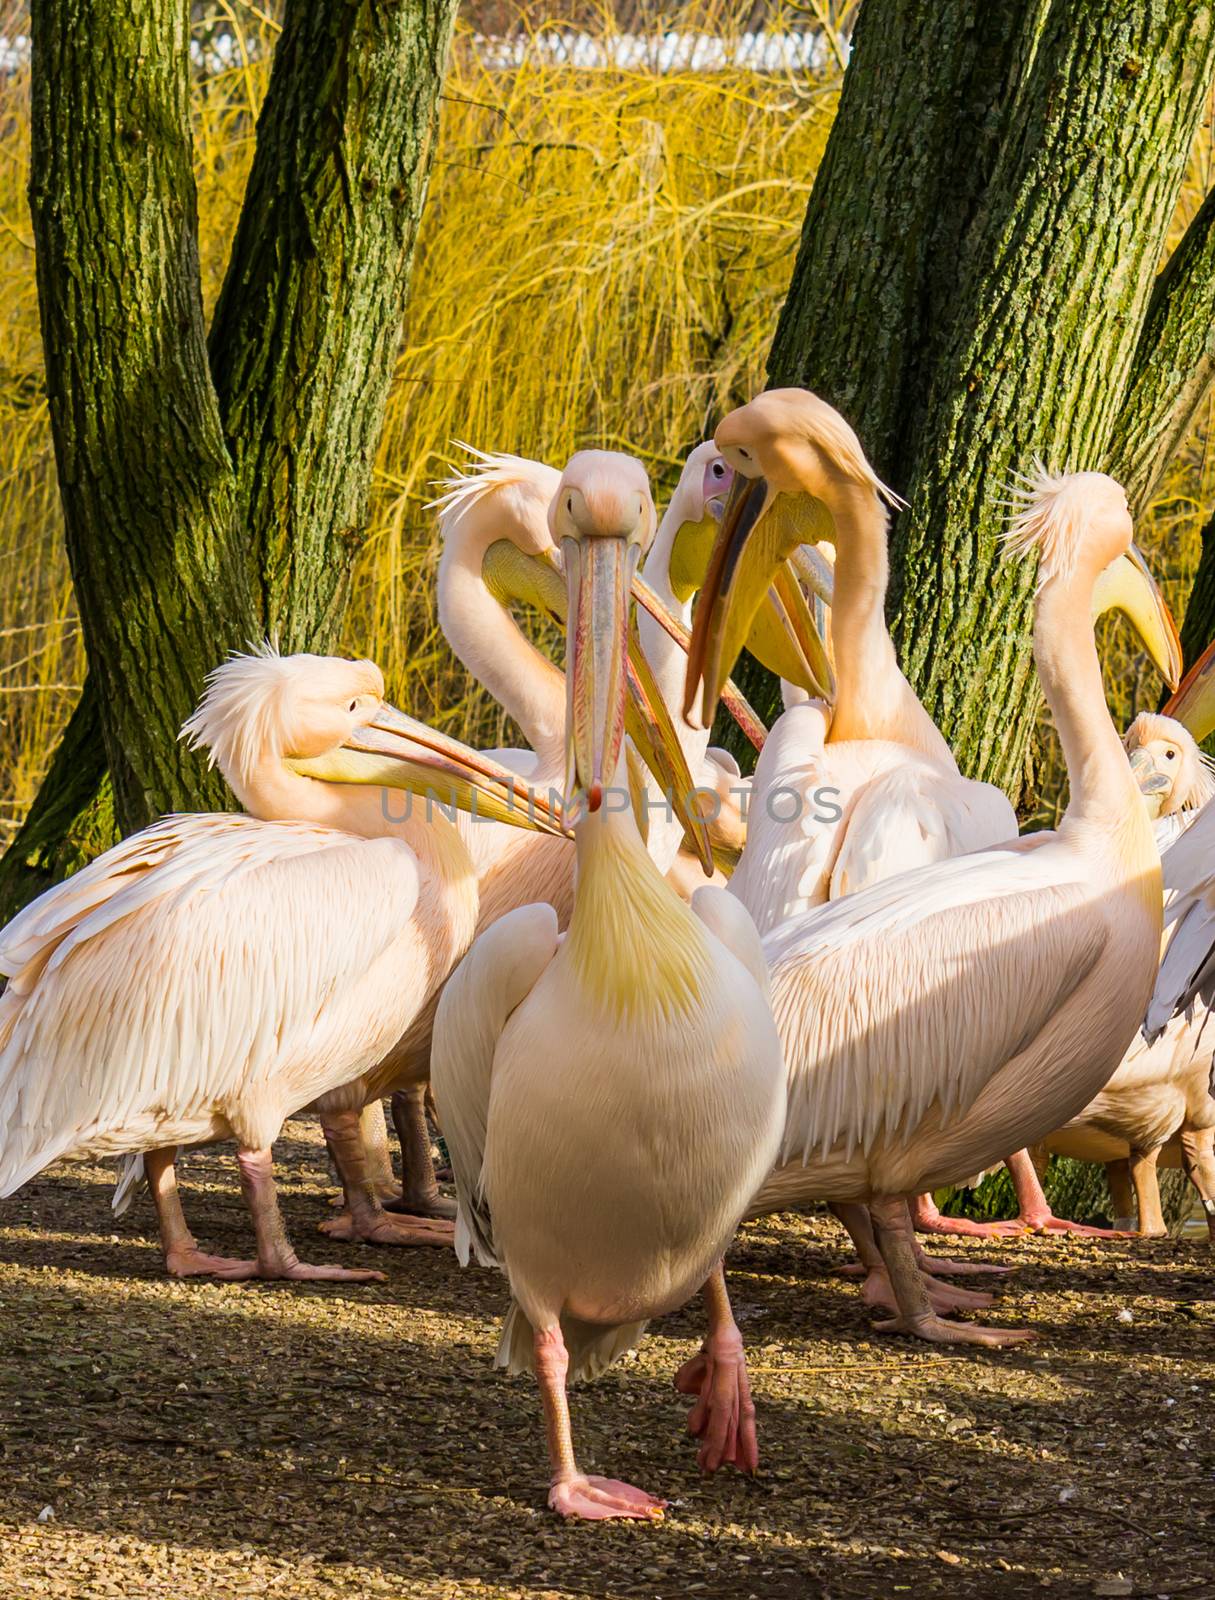 Rosy pelican walking towards the camera, big family of pelicans in the background, flock of birds by charlottebleijenberg